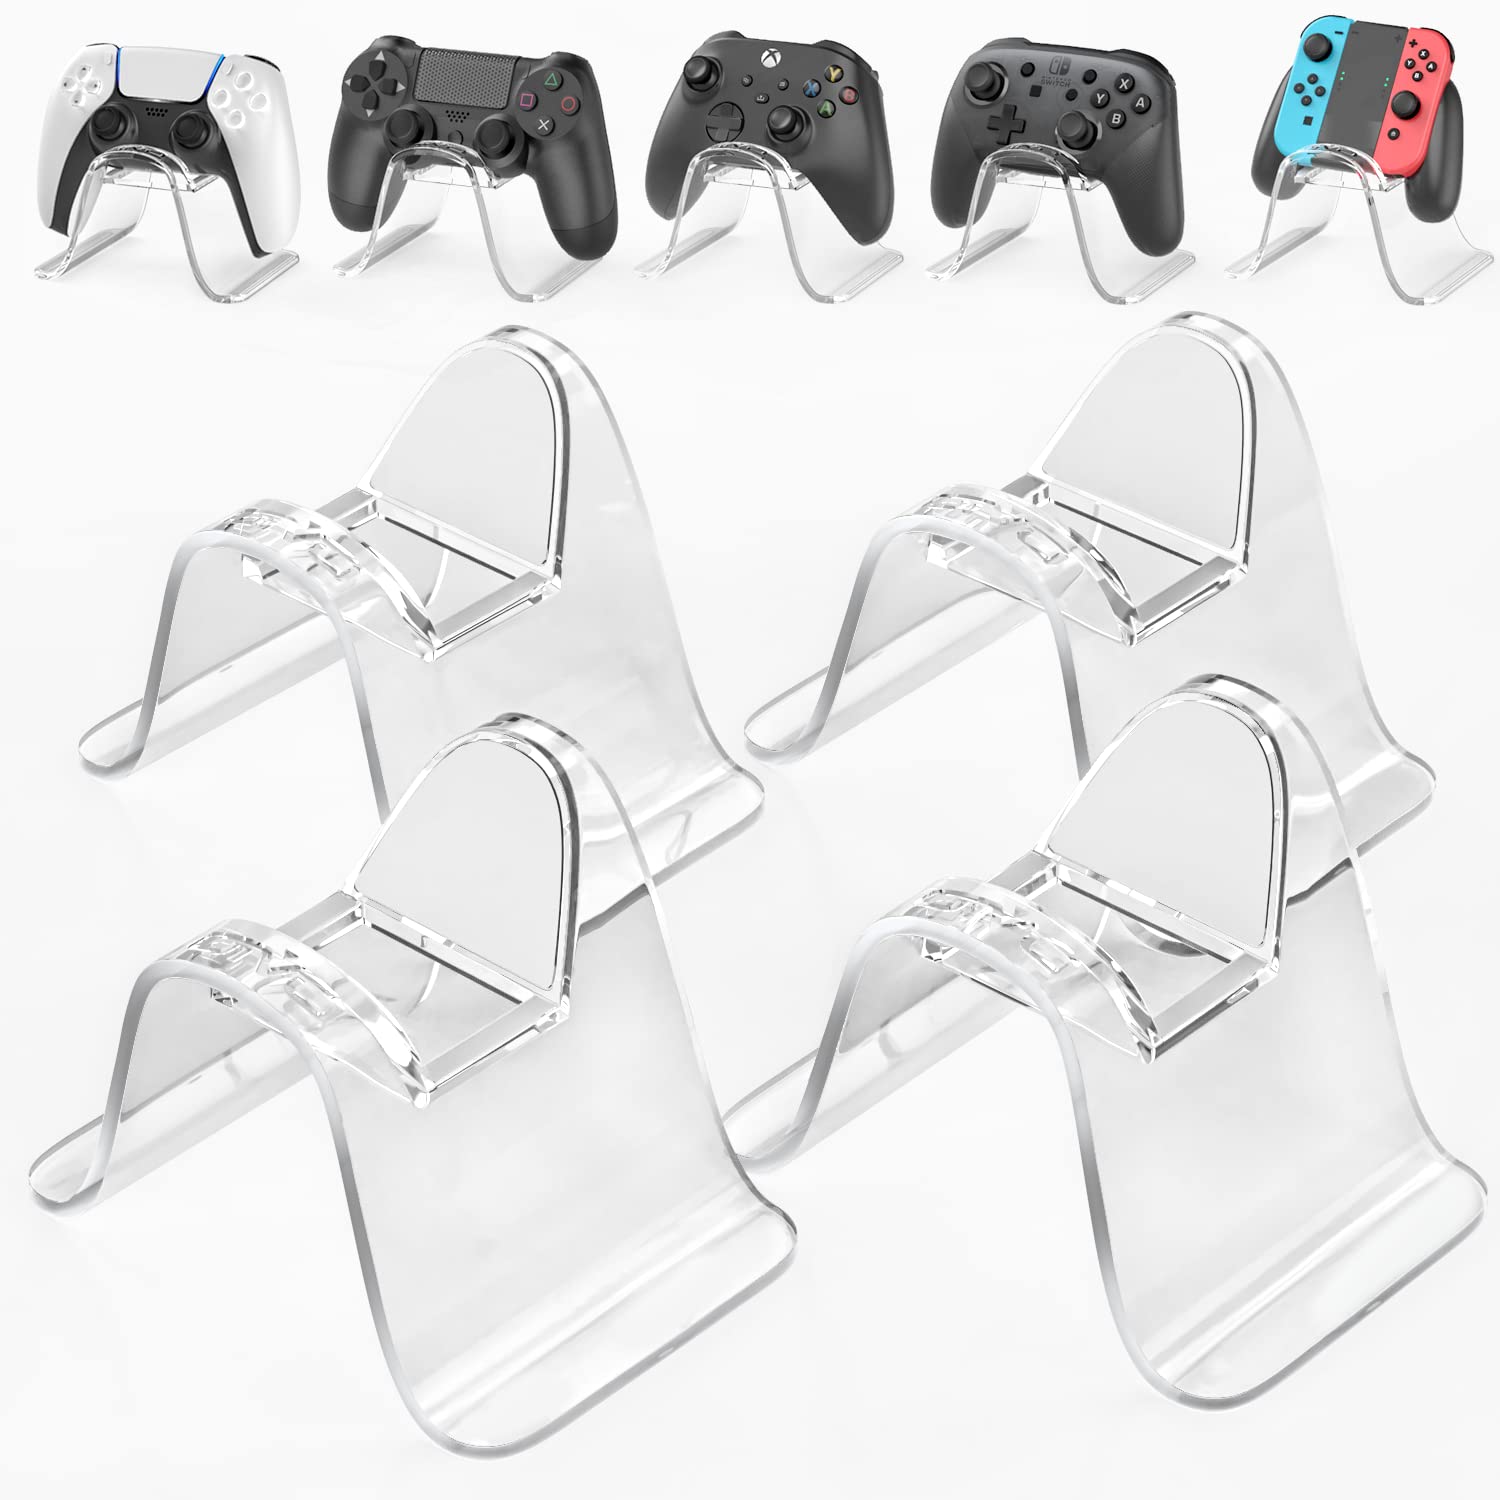 OIVO Game Controller Holder for Desk, Clear Controller Stand for PS3/PS4/PS5/Xbox/Switch Pro Controller, Stackable Controller Organizer Controller Storage 4 Packs